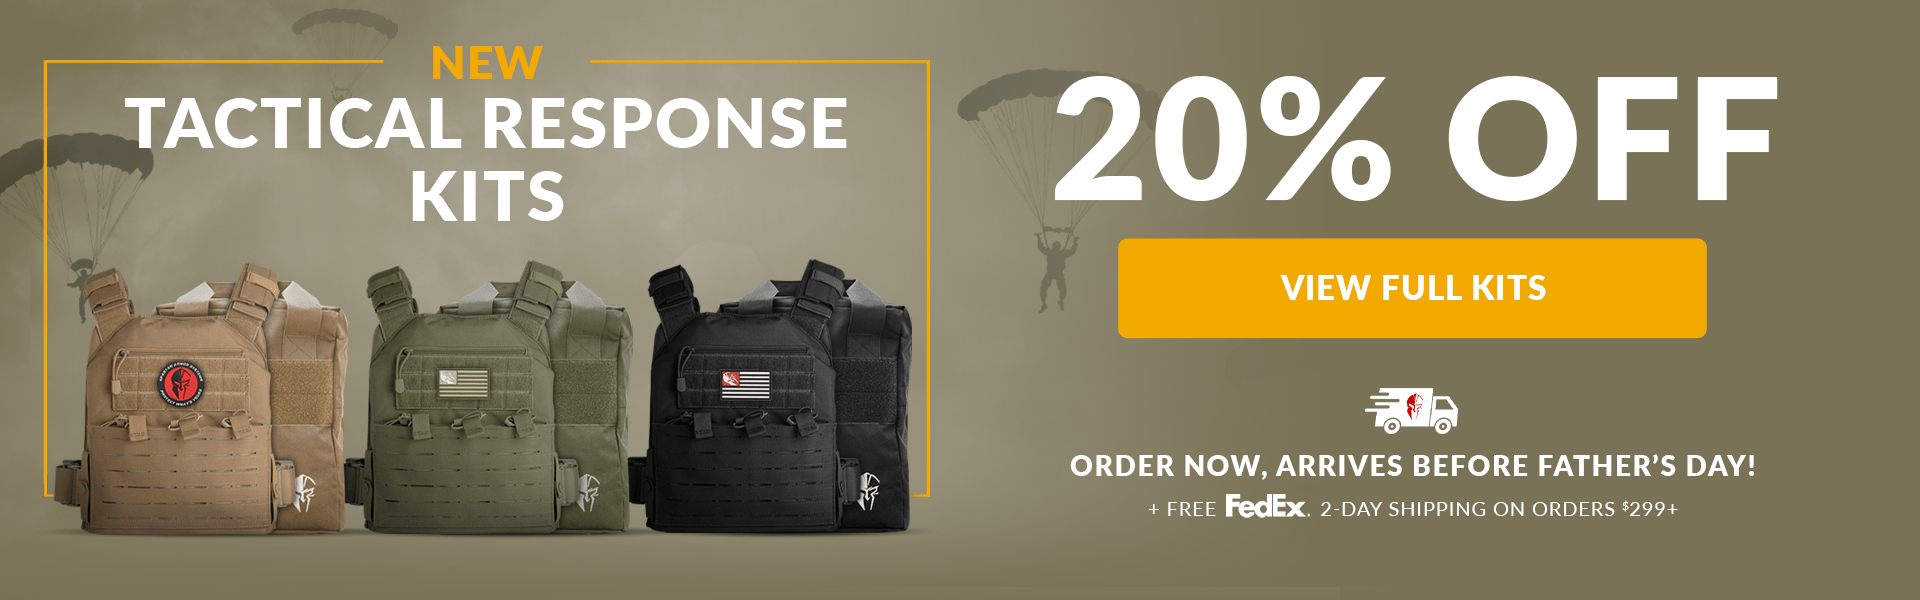 New Tactical Response Kits in multiple variations